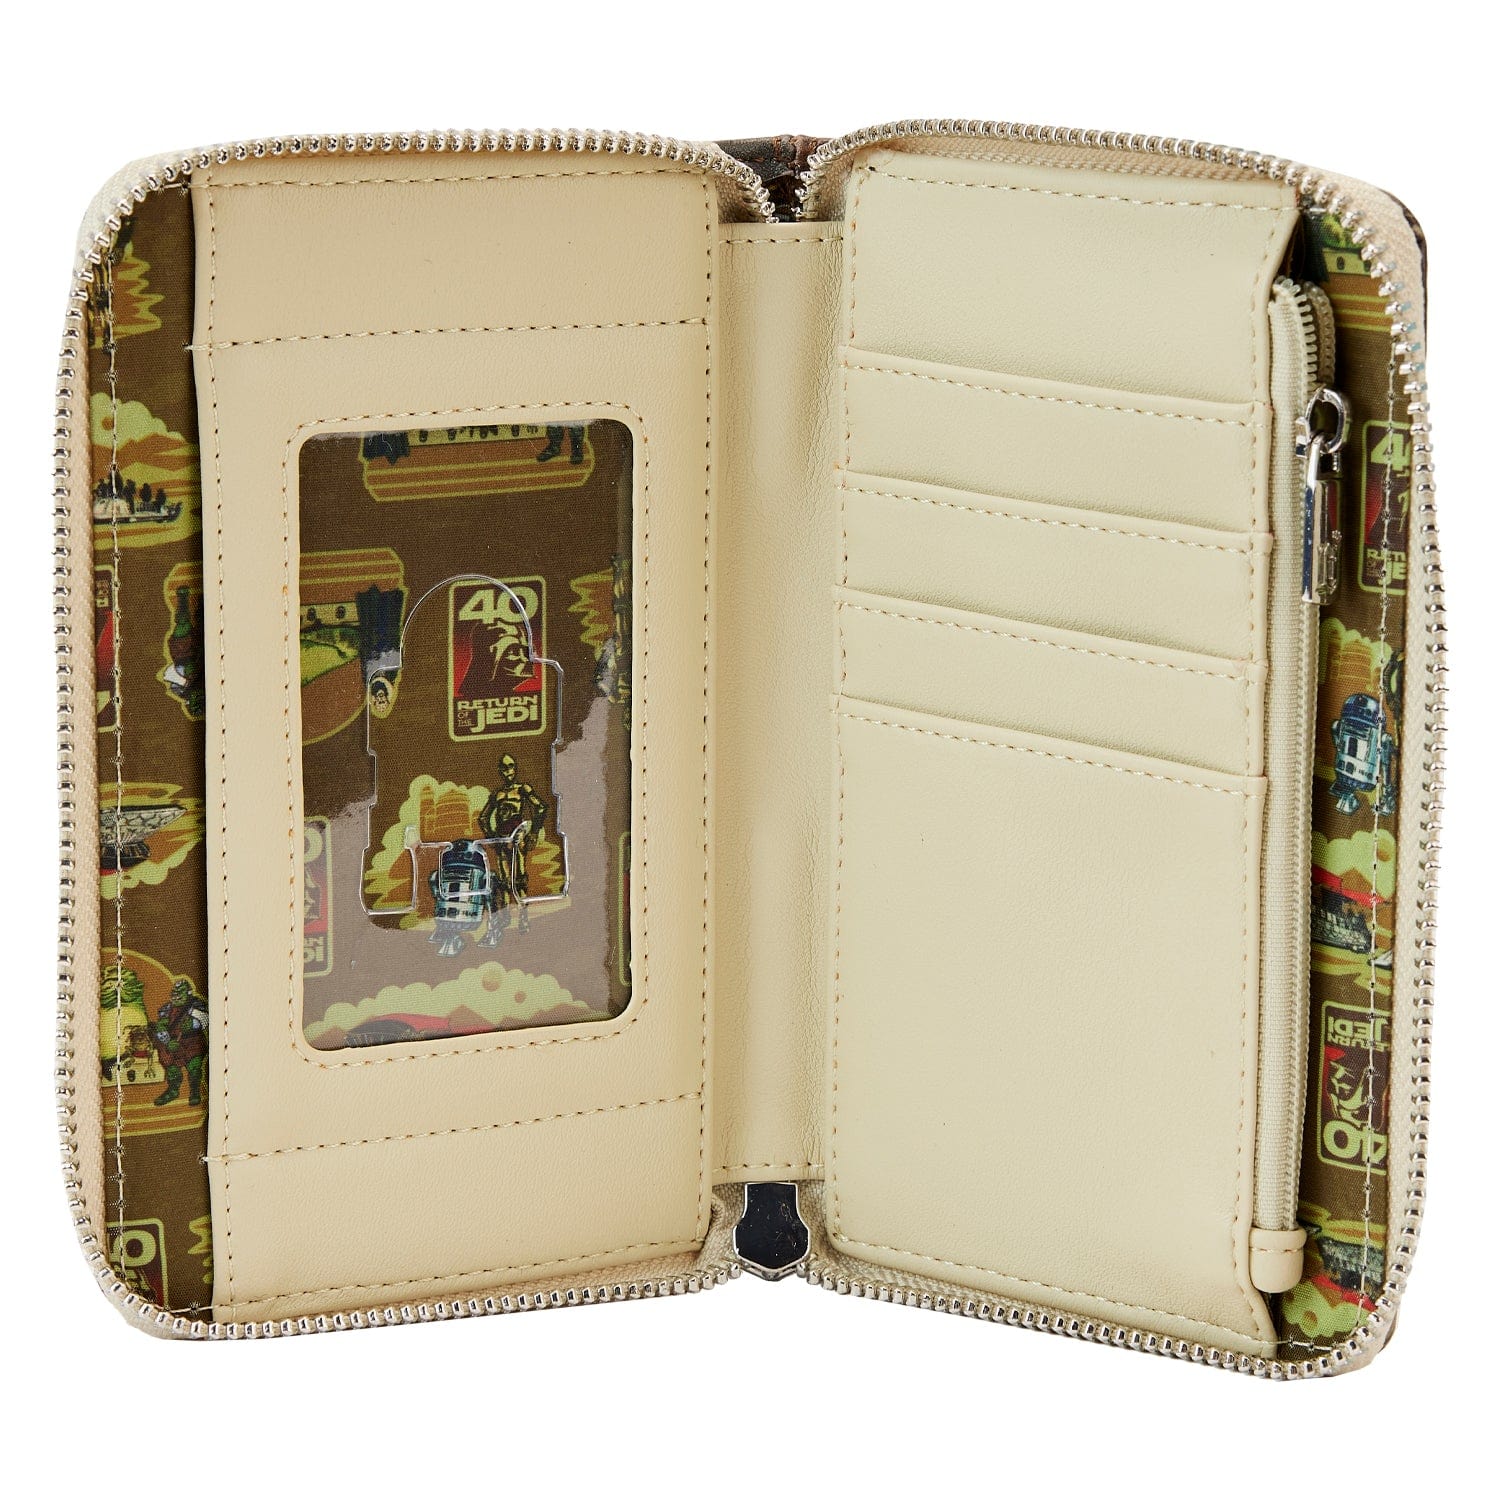 Loungefly Loungefly Star Wars Return of the Jedi 40th Anniversary Jabba's Palace Wallet Kawaii Gifts 671803453876